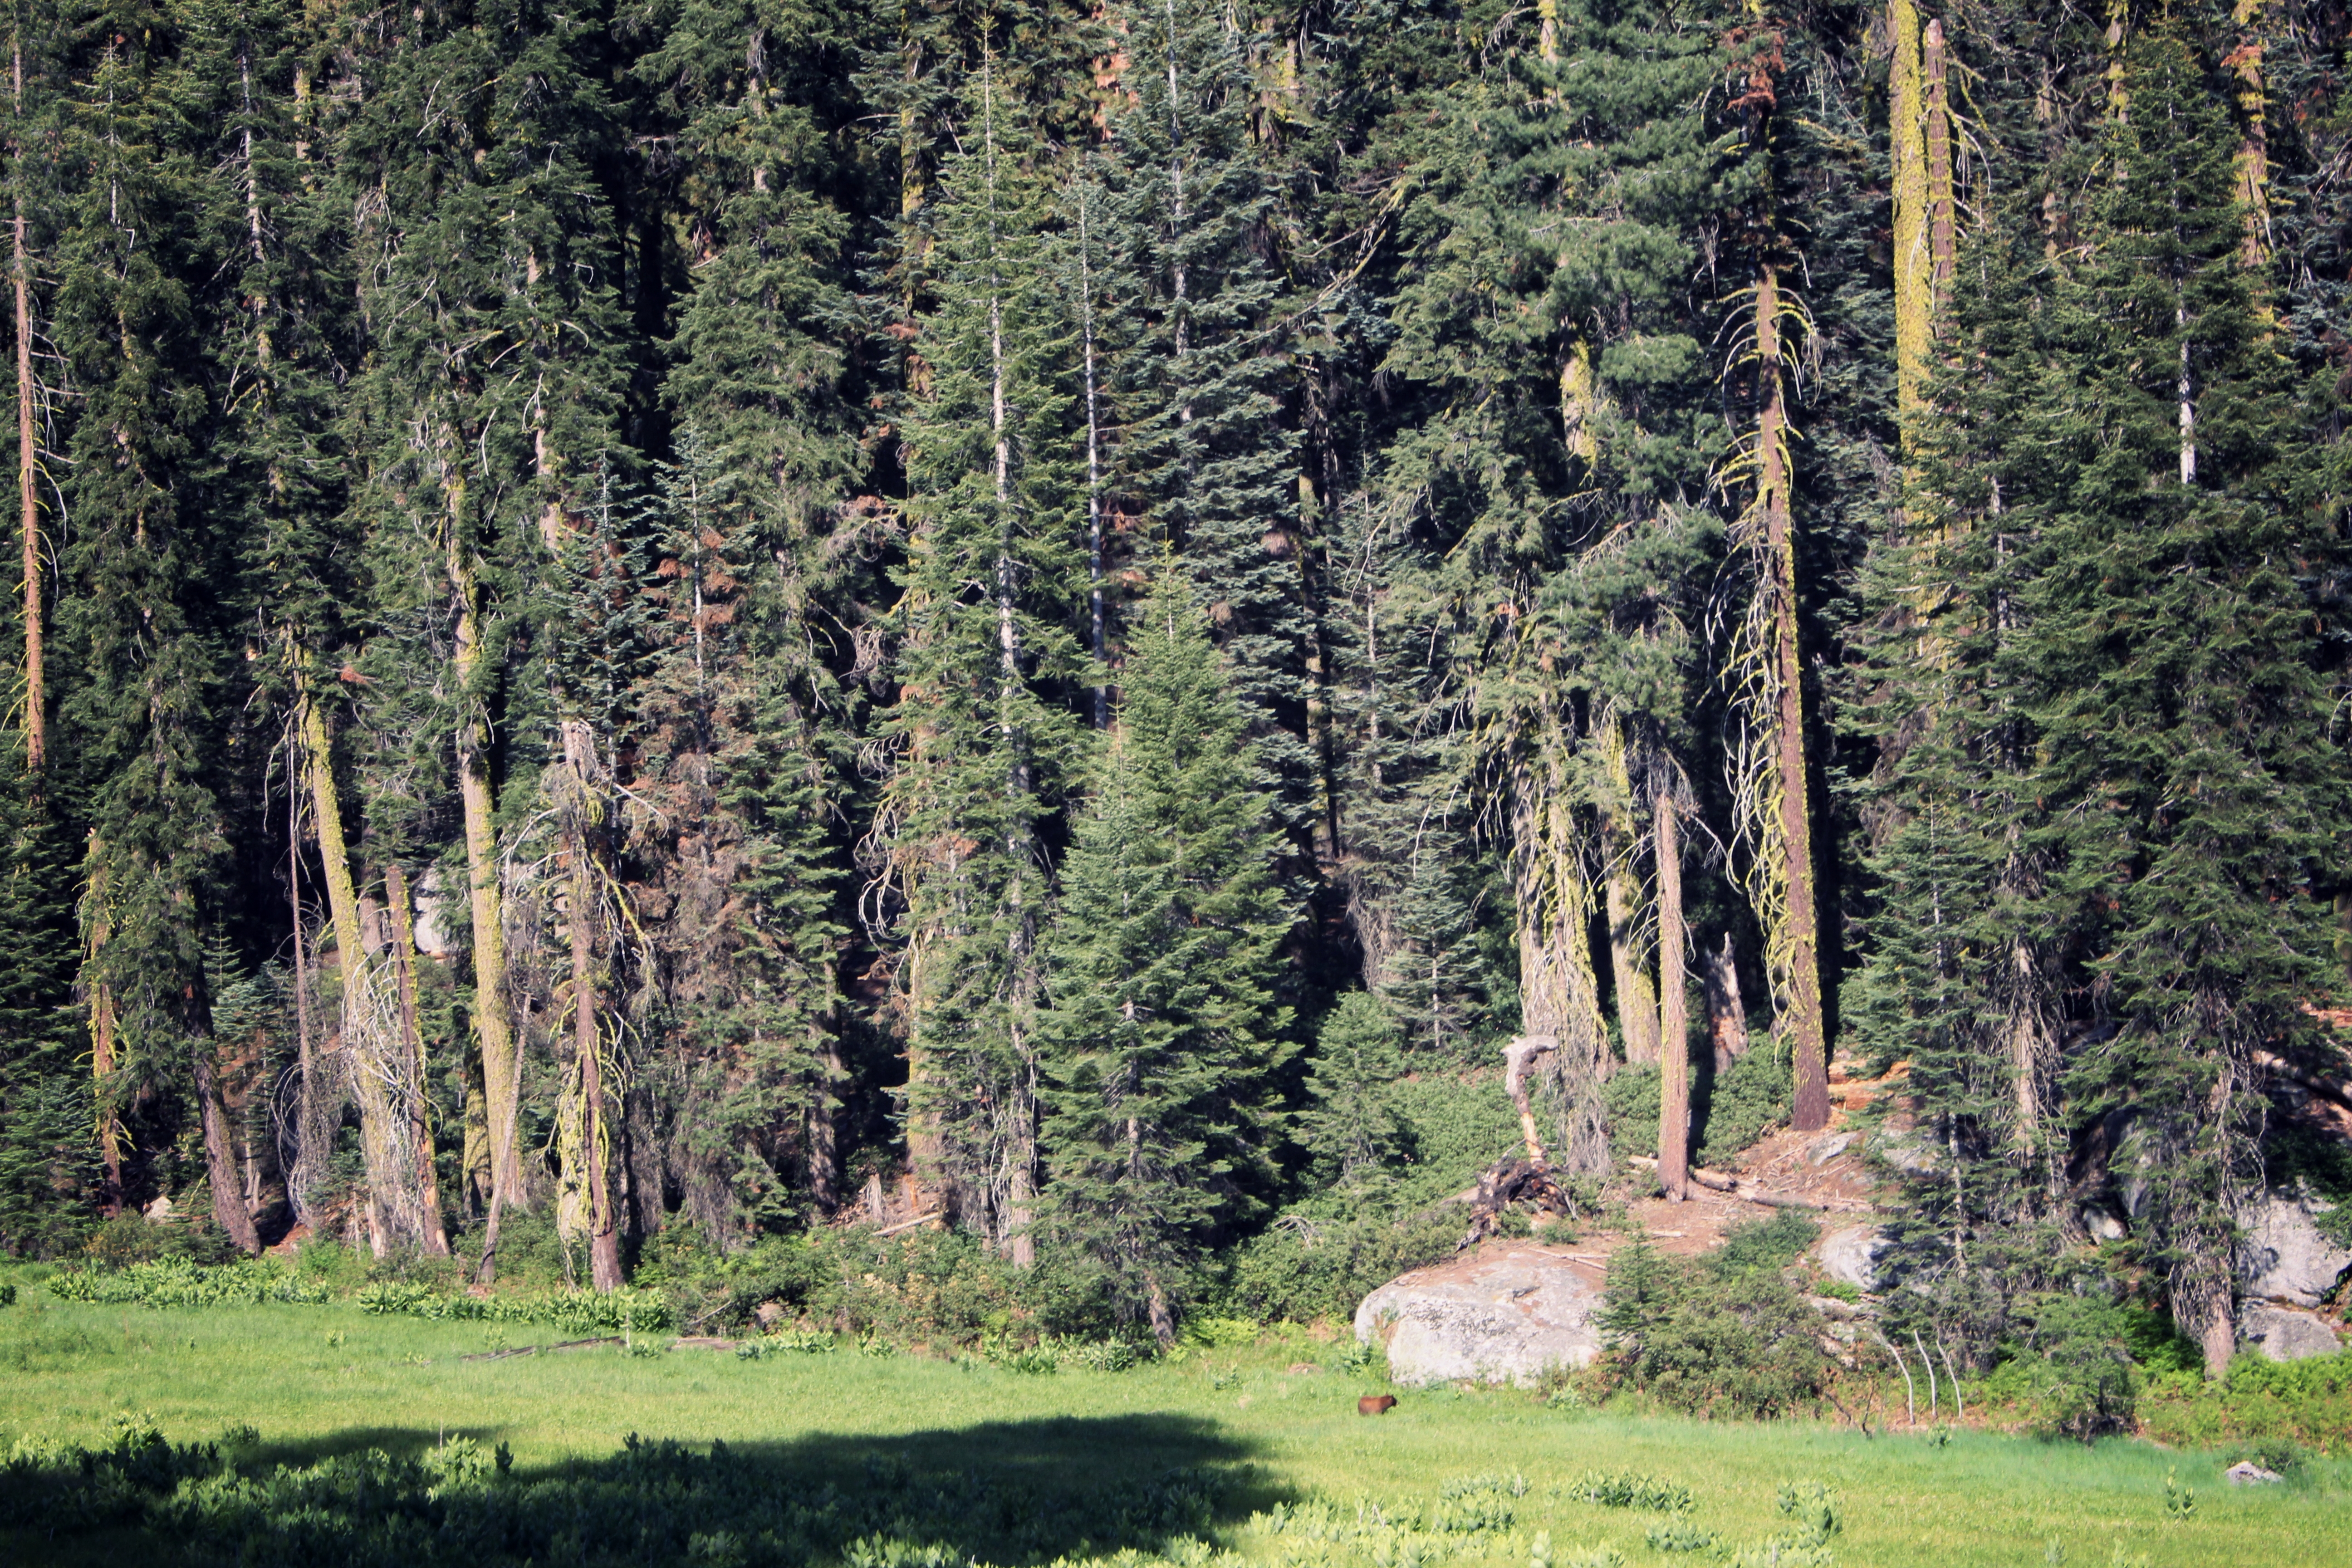 Bear in a meadow in Sequoia National Park, California